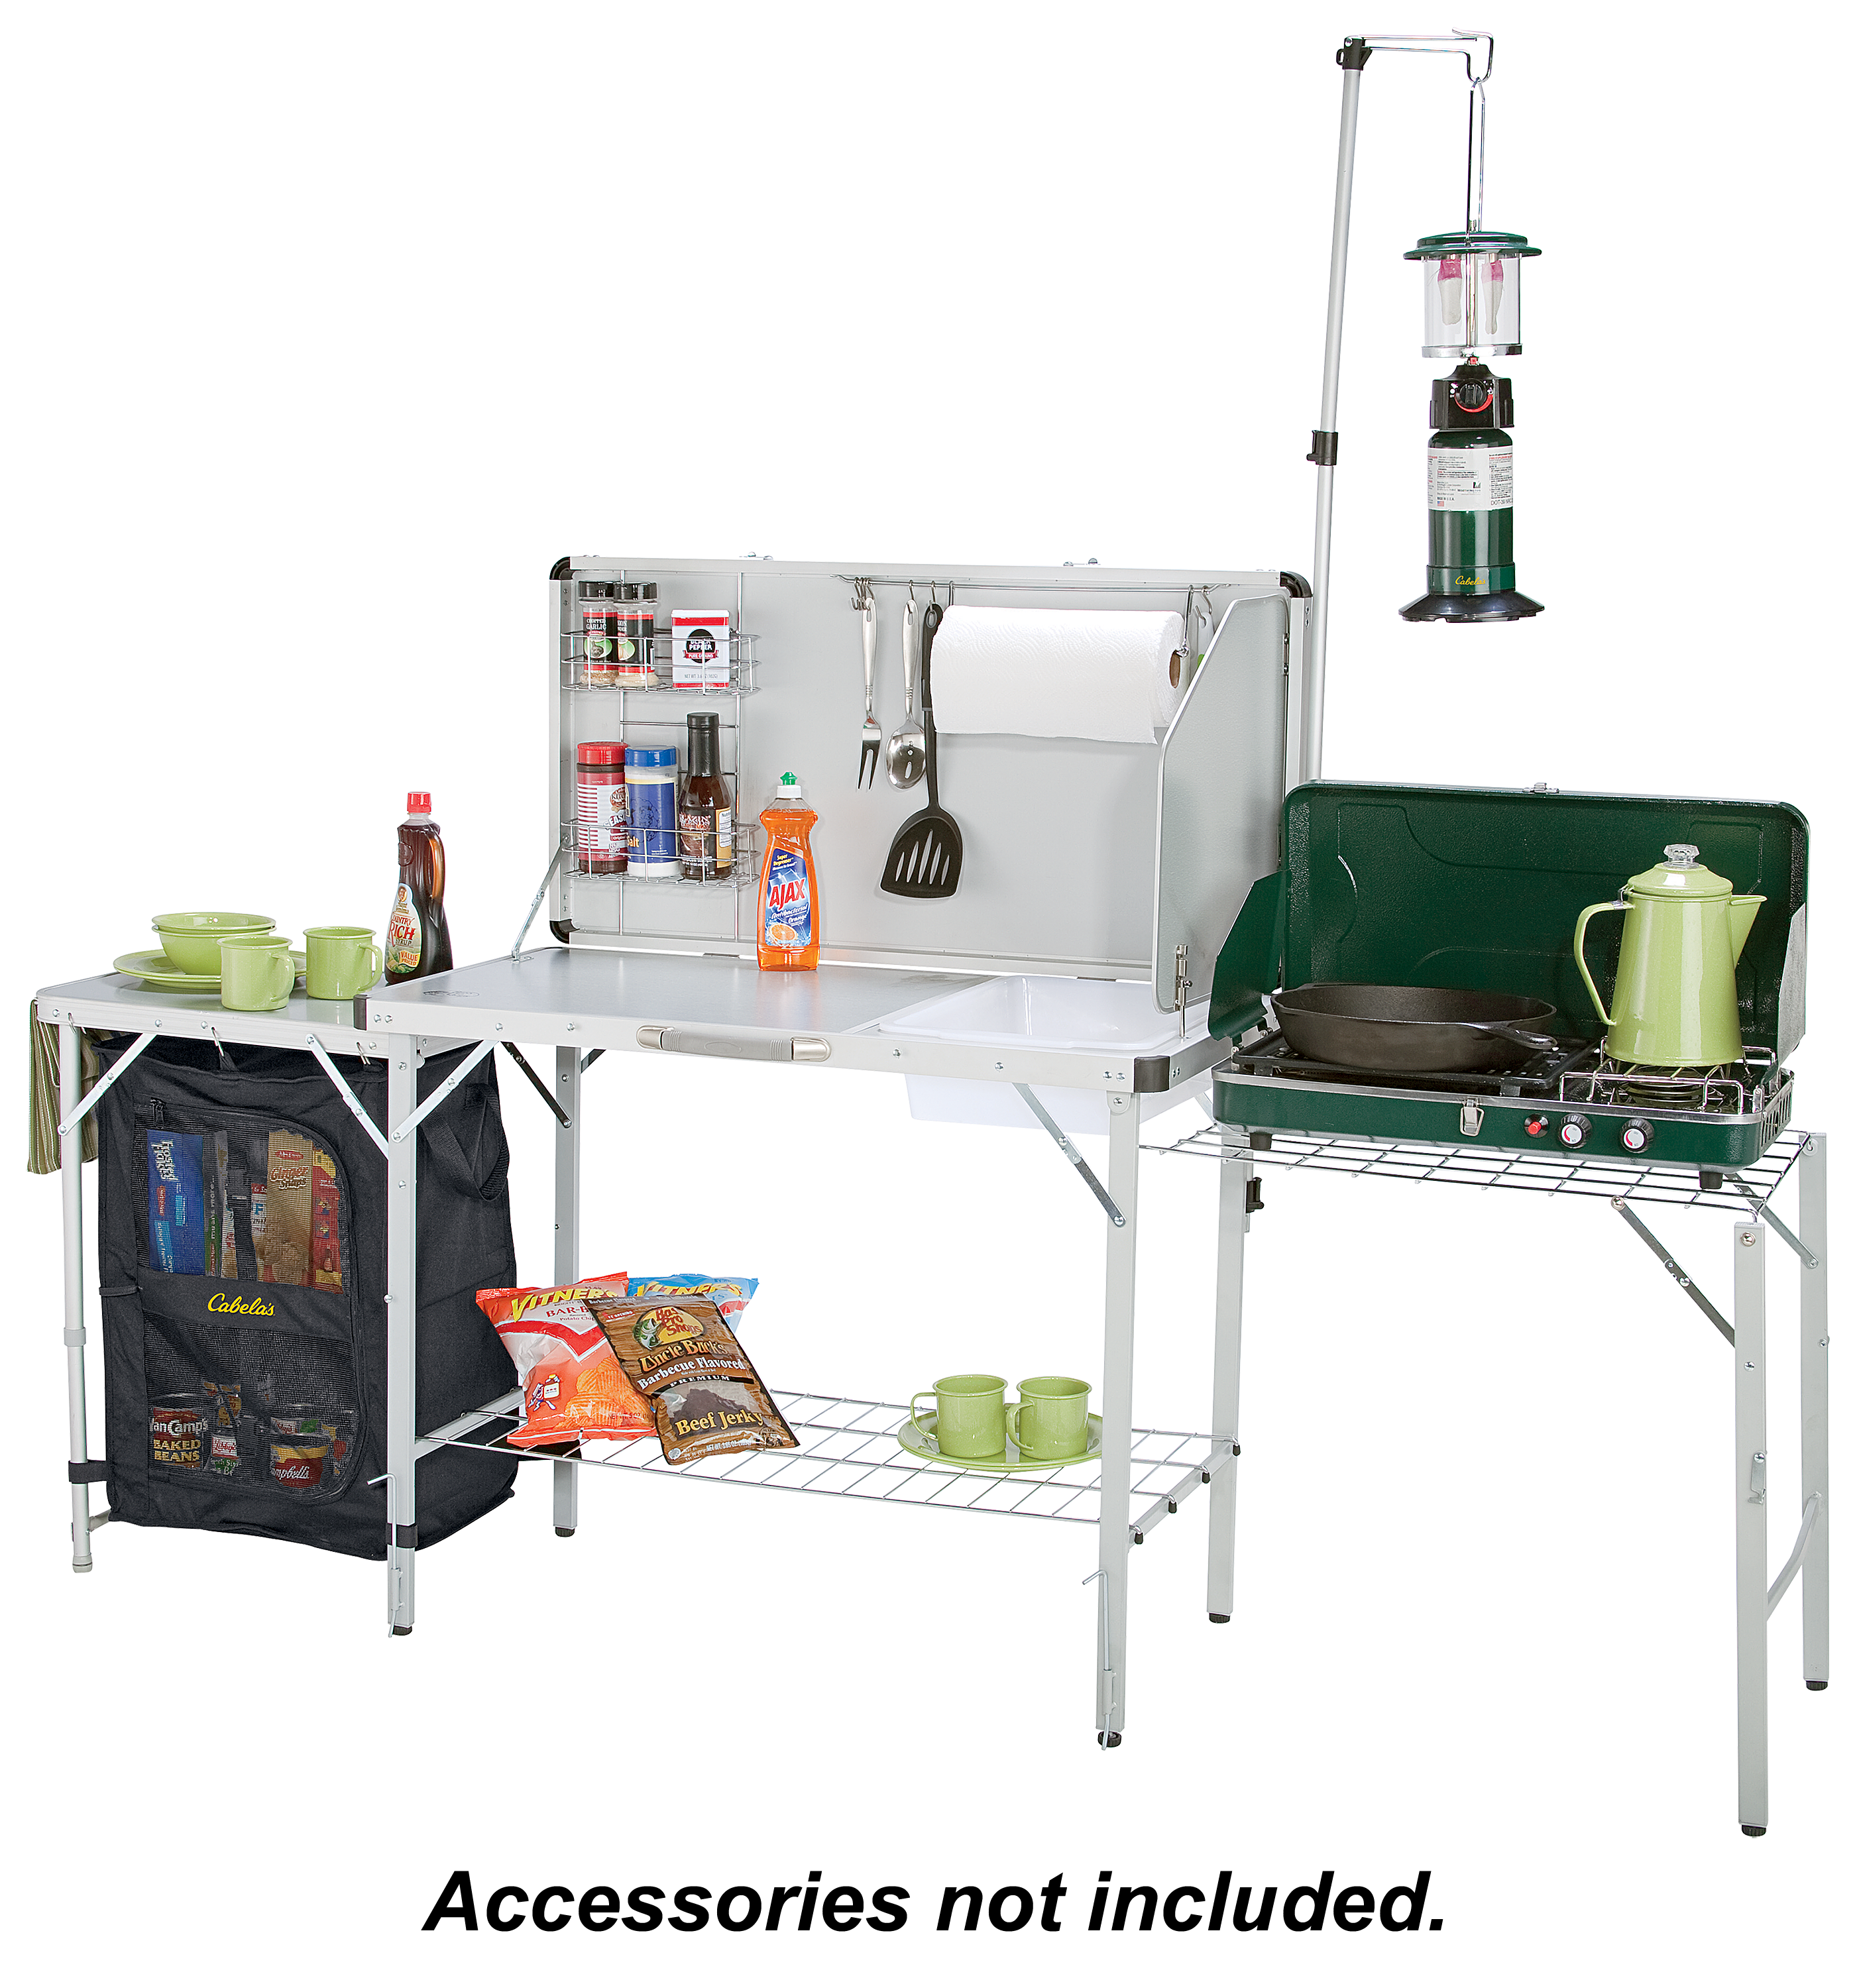 Kanz Mobile Kitchens: For Camping & Beyond